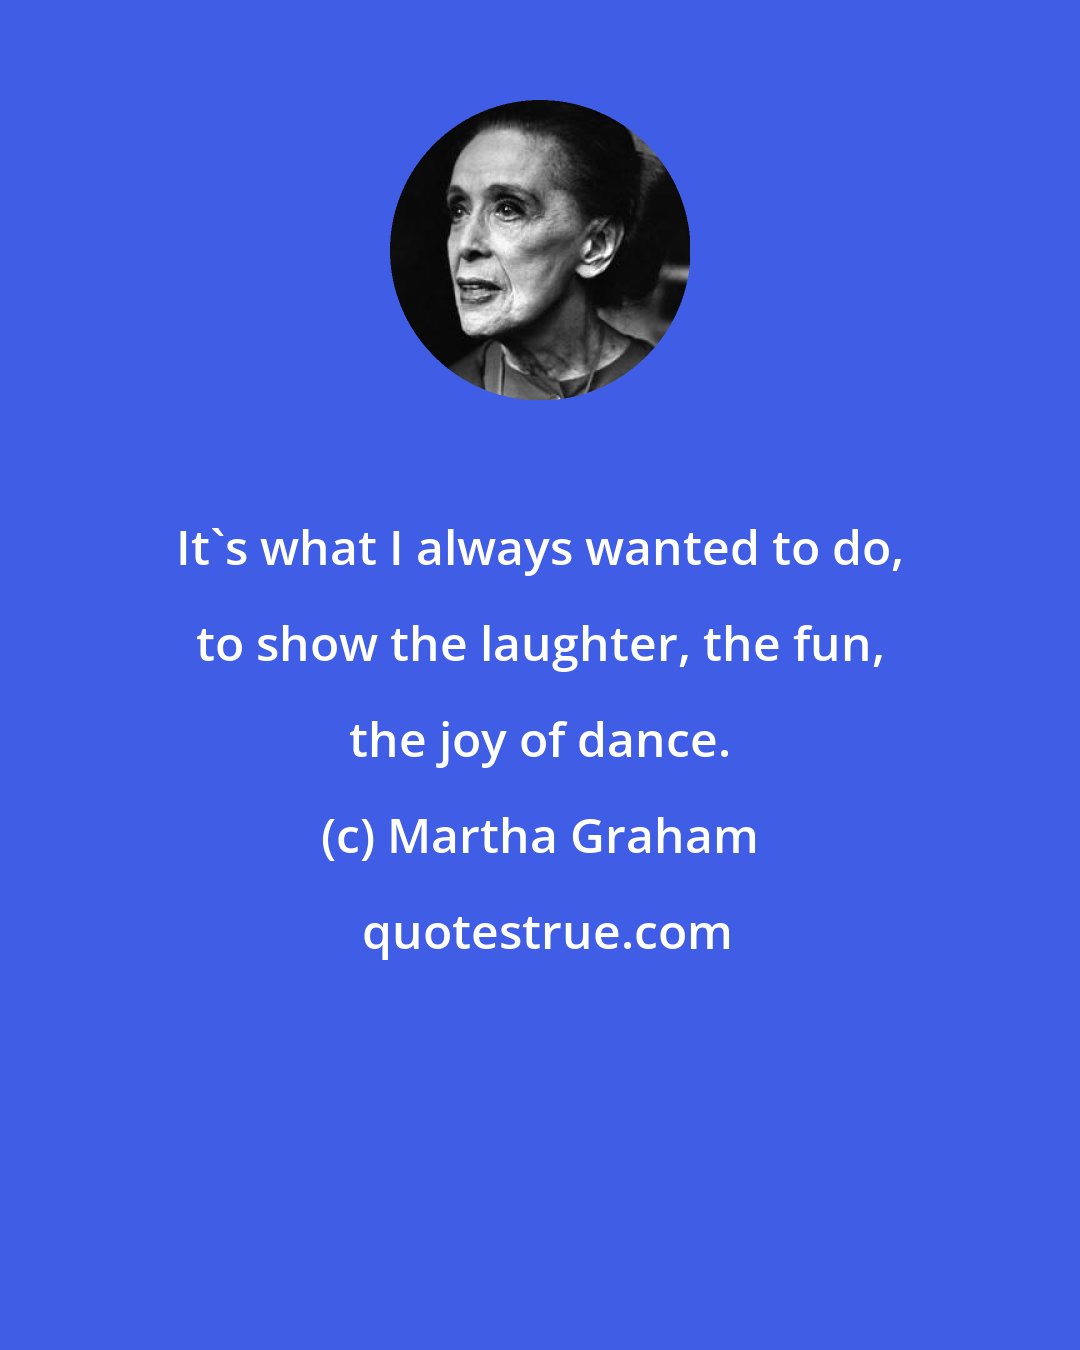 Martha Graham: It's what I always wanted to do, to show the laughter, the fun, the joy of dance.